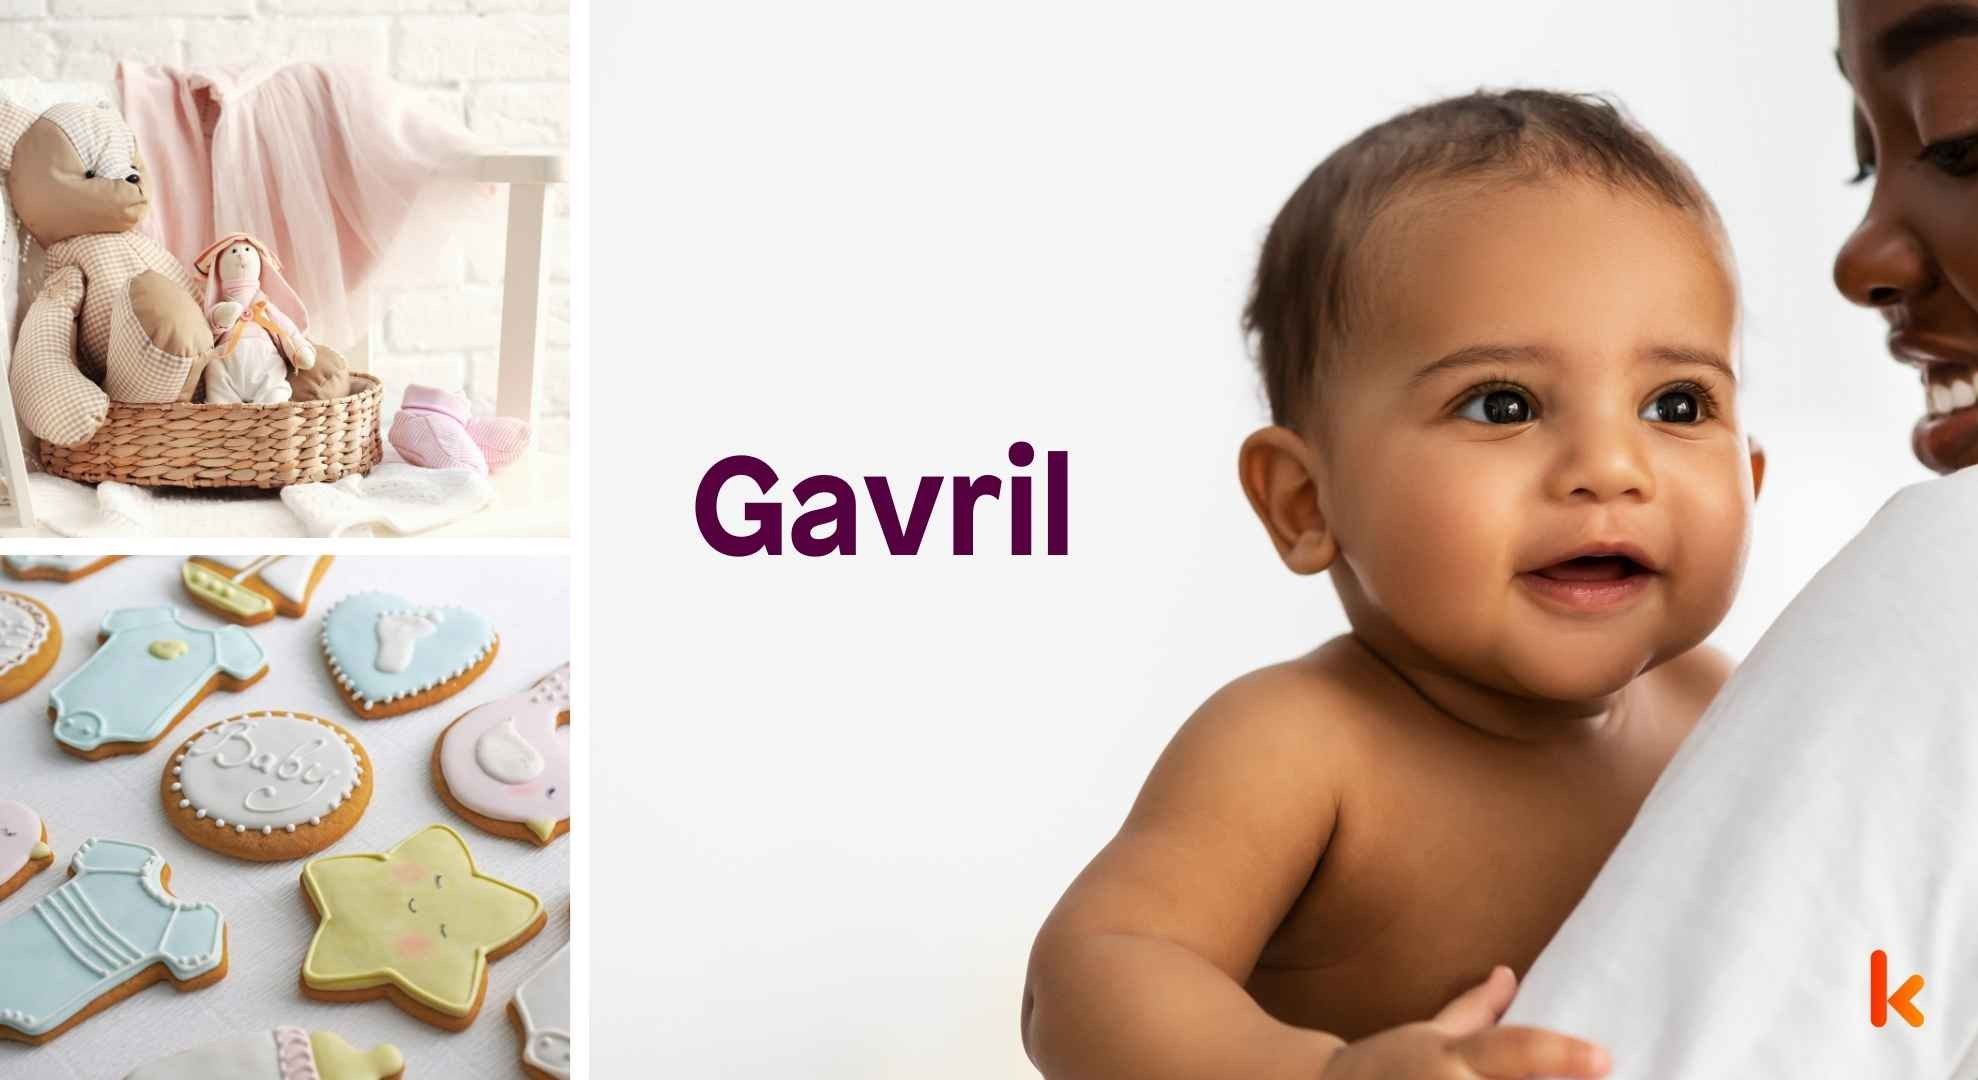 Meaning of the name Gavril